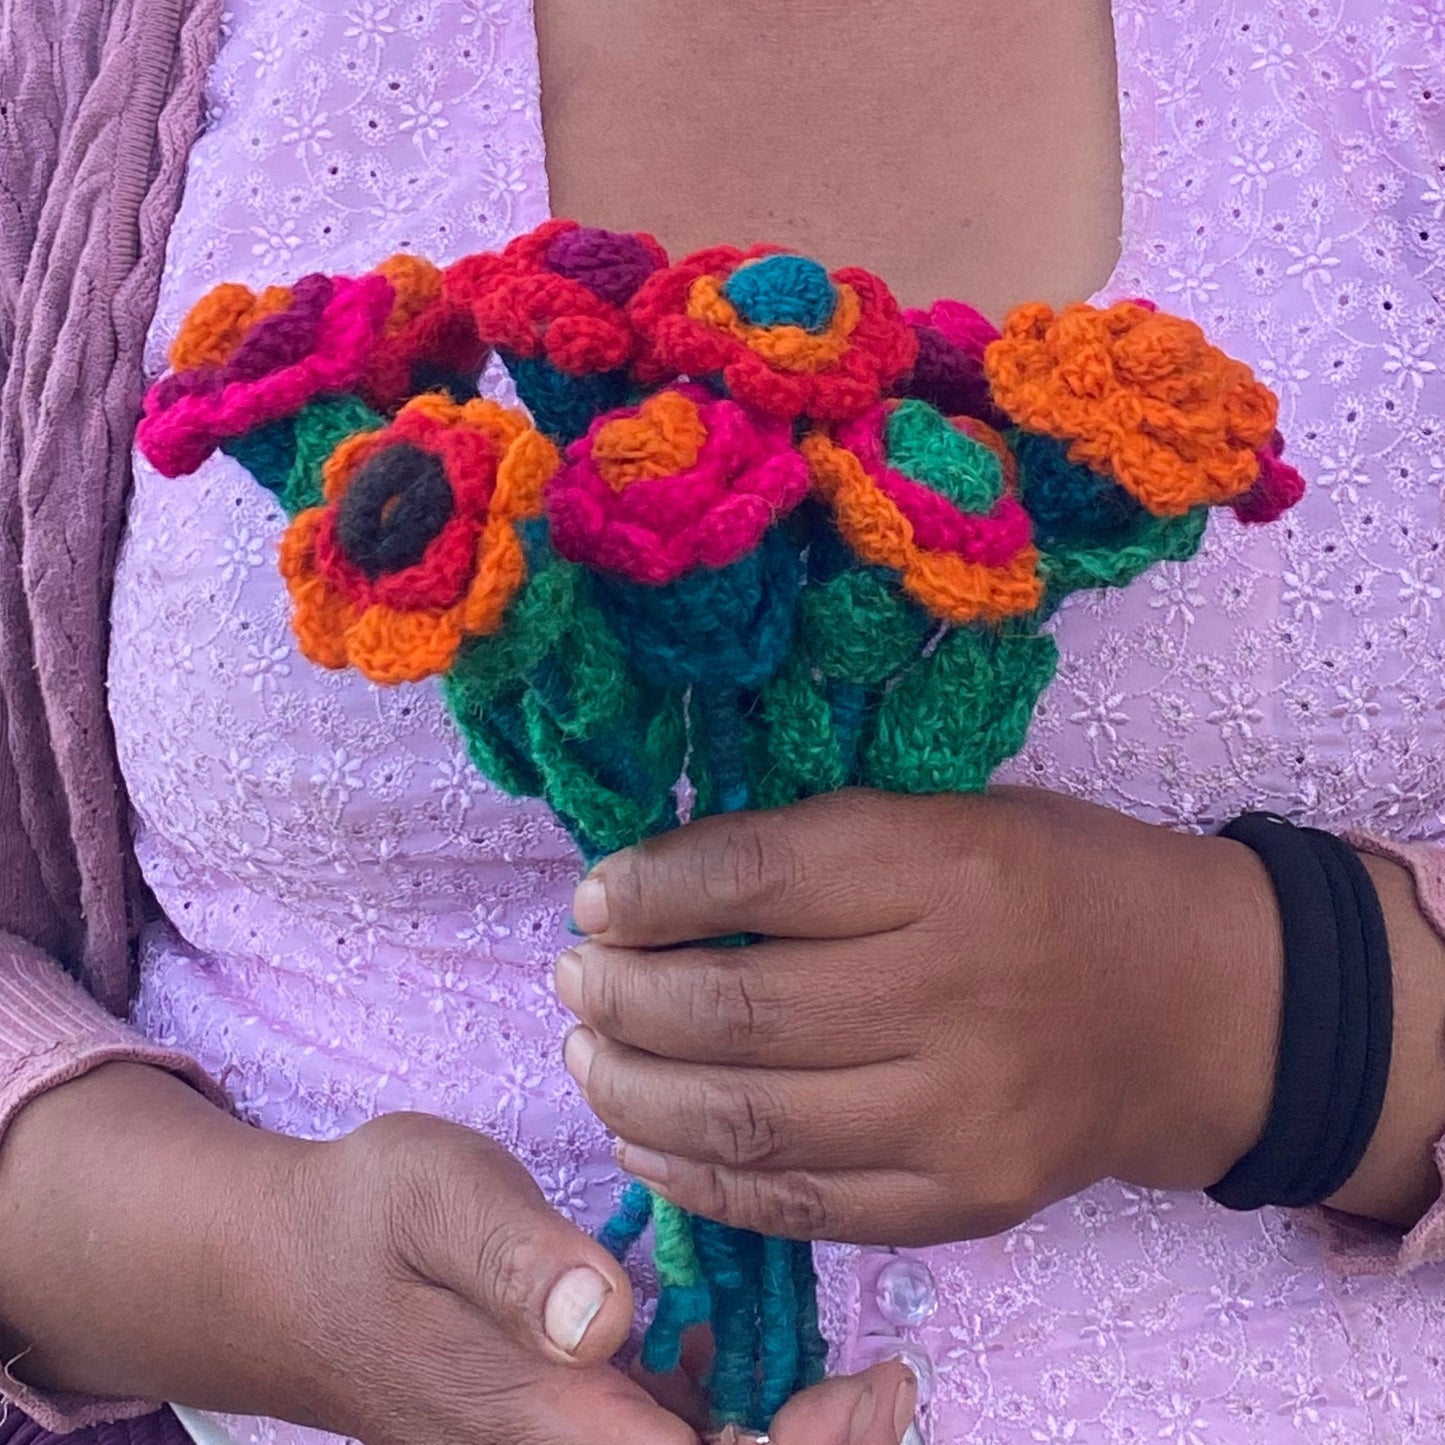 Crochet Hand Made Knitted Mixed Colors Flowers